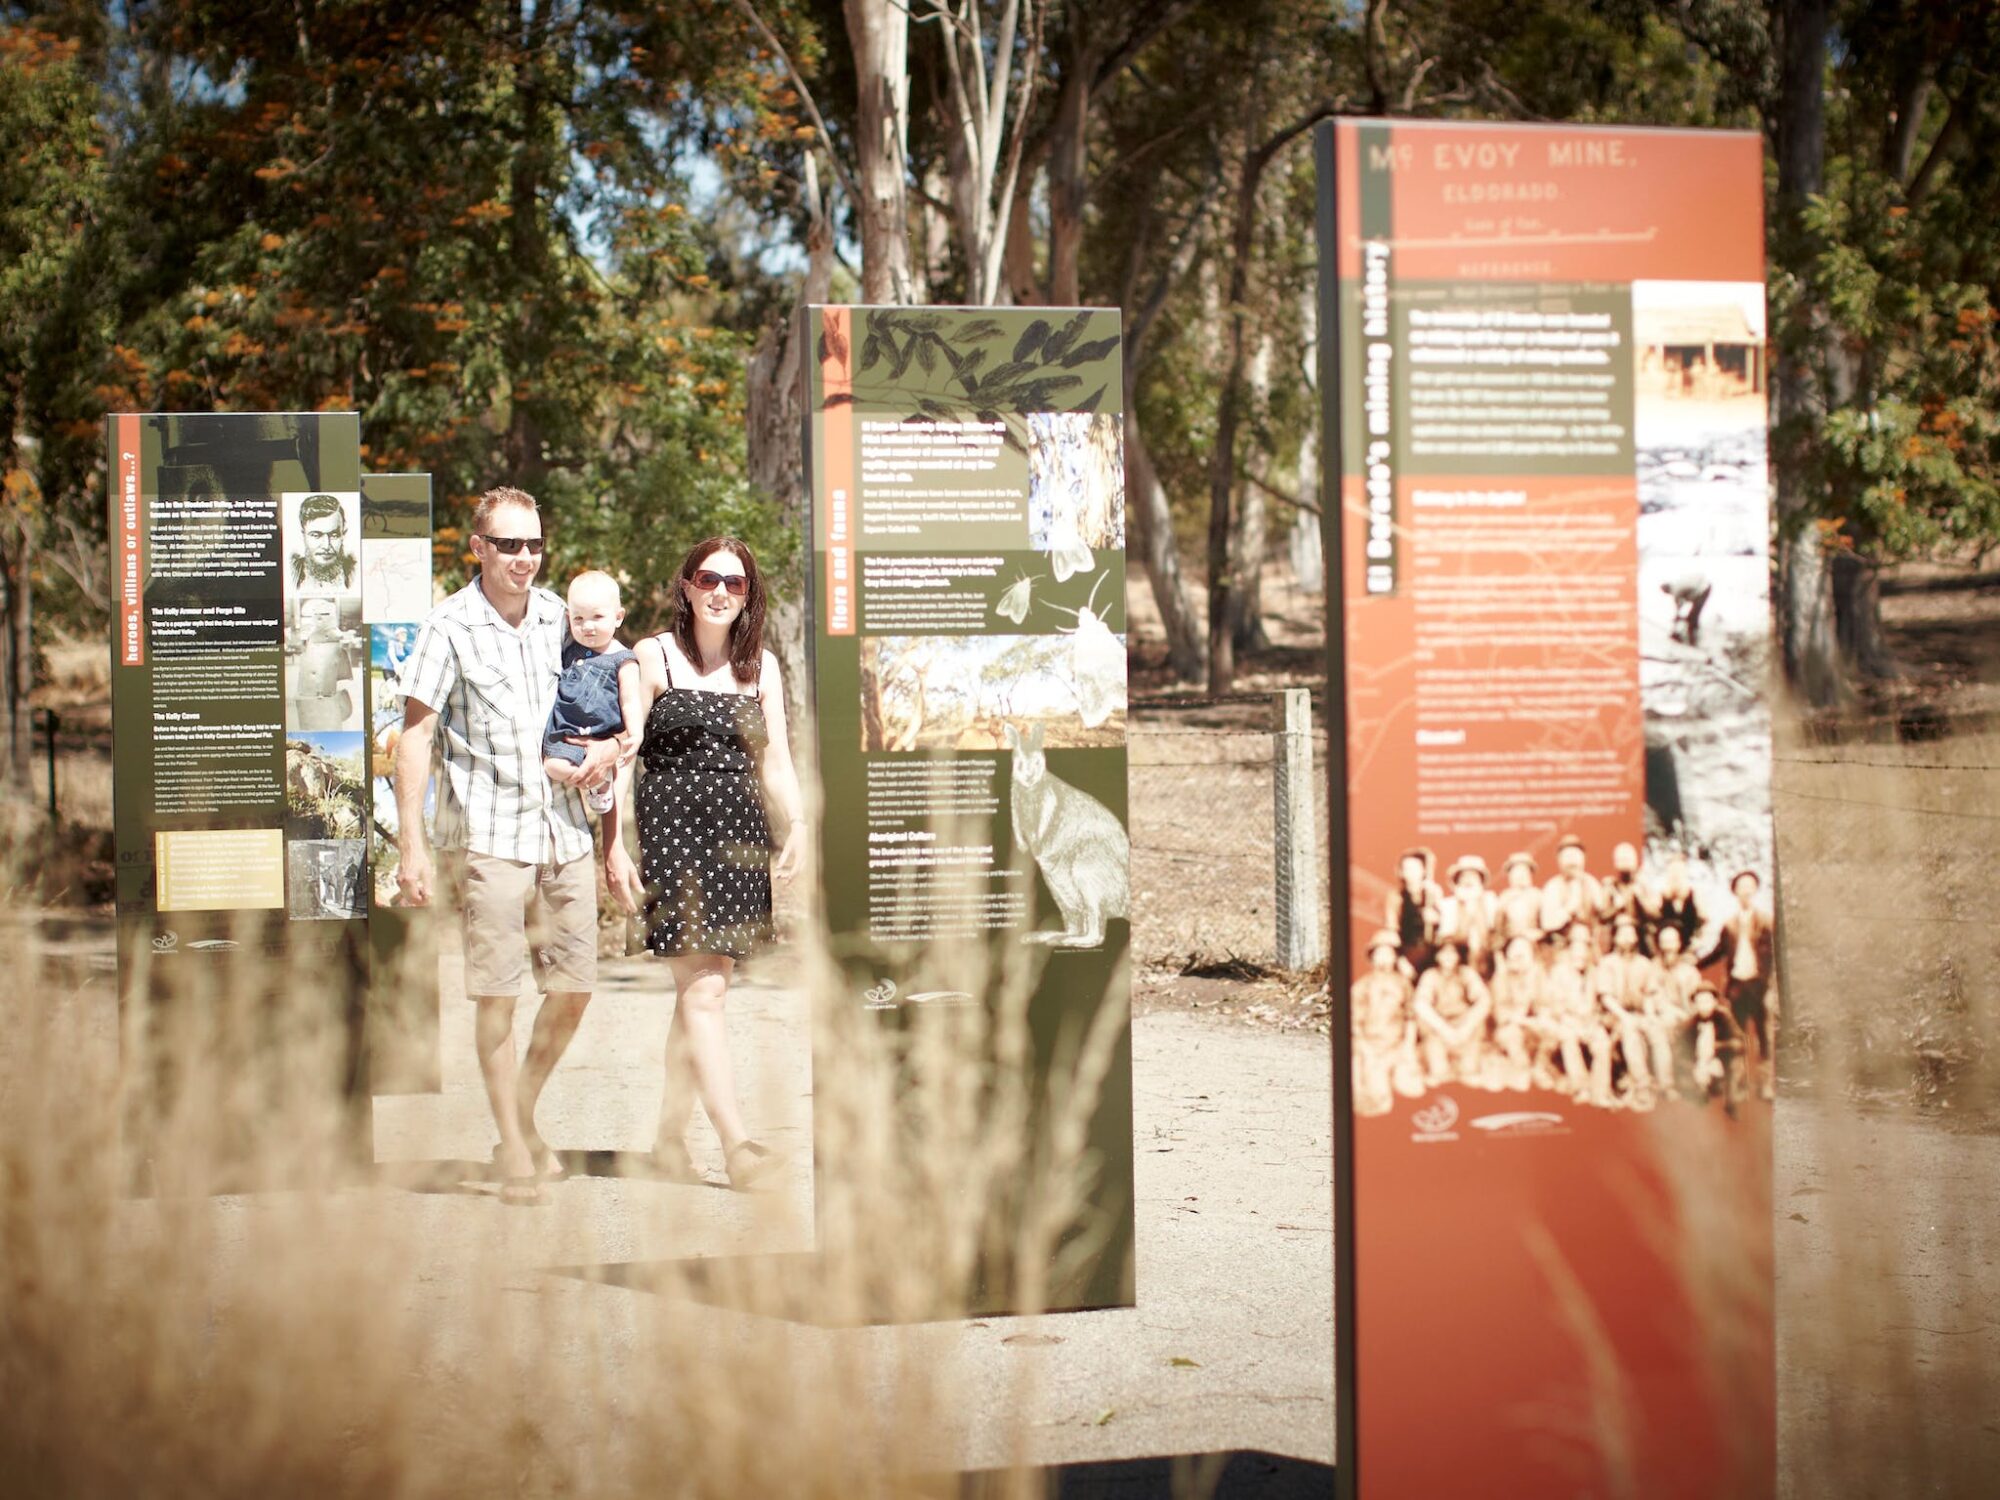 Family walking along path in the sun, looking at interpretive signage